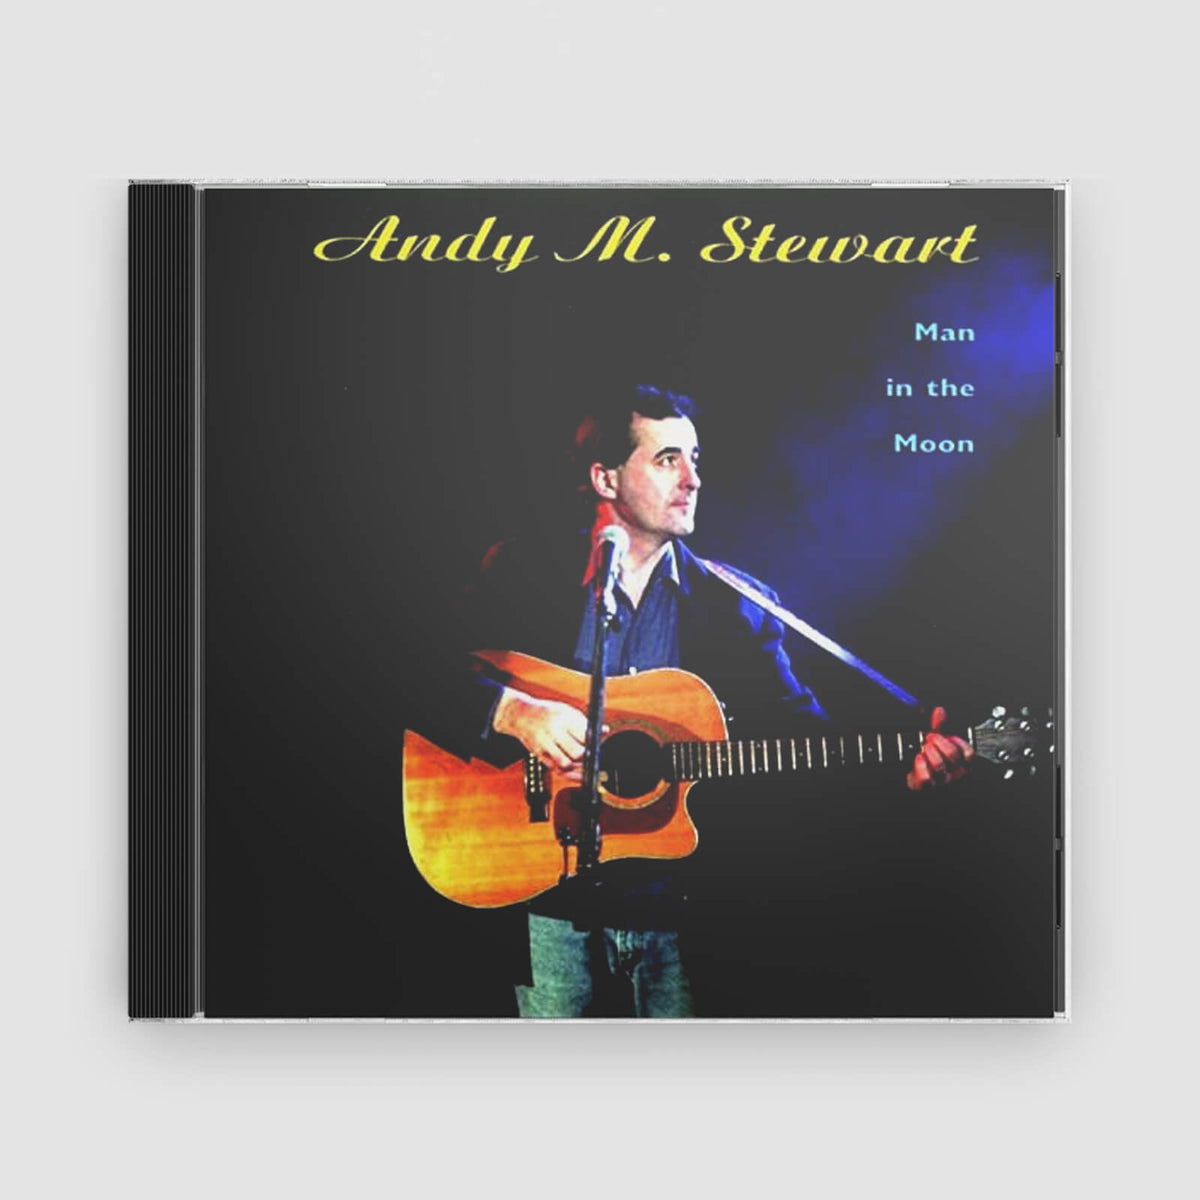 ANDY M STEWART : MAN IN THE MOON